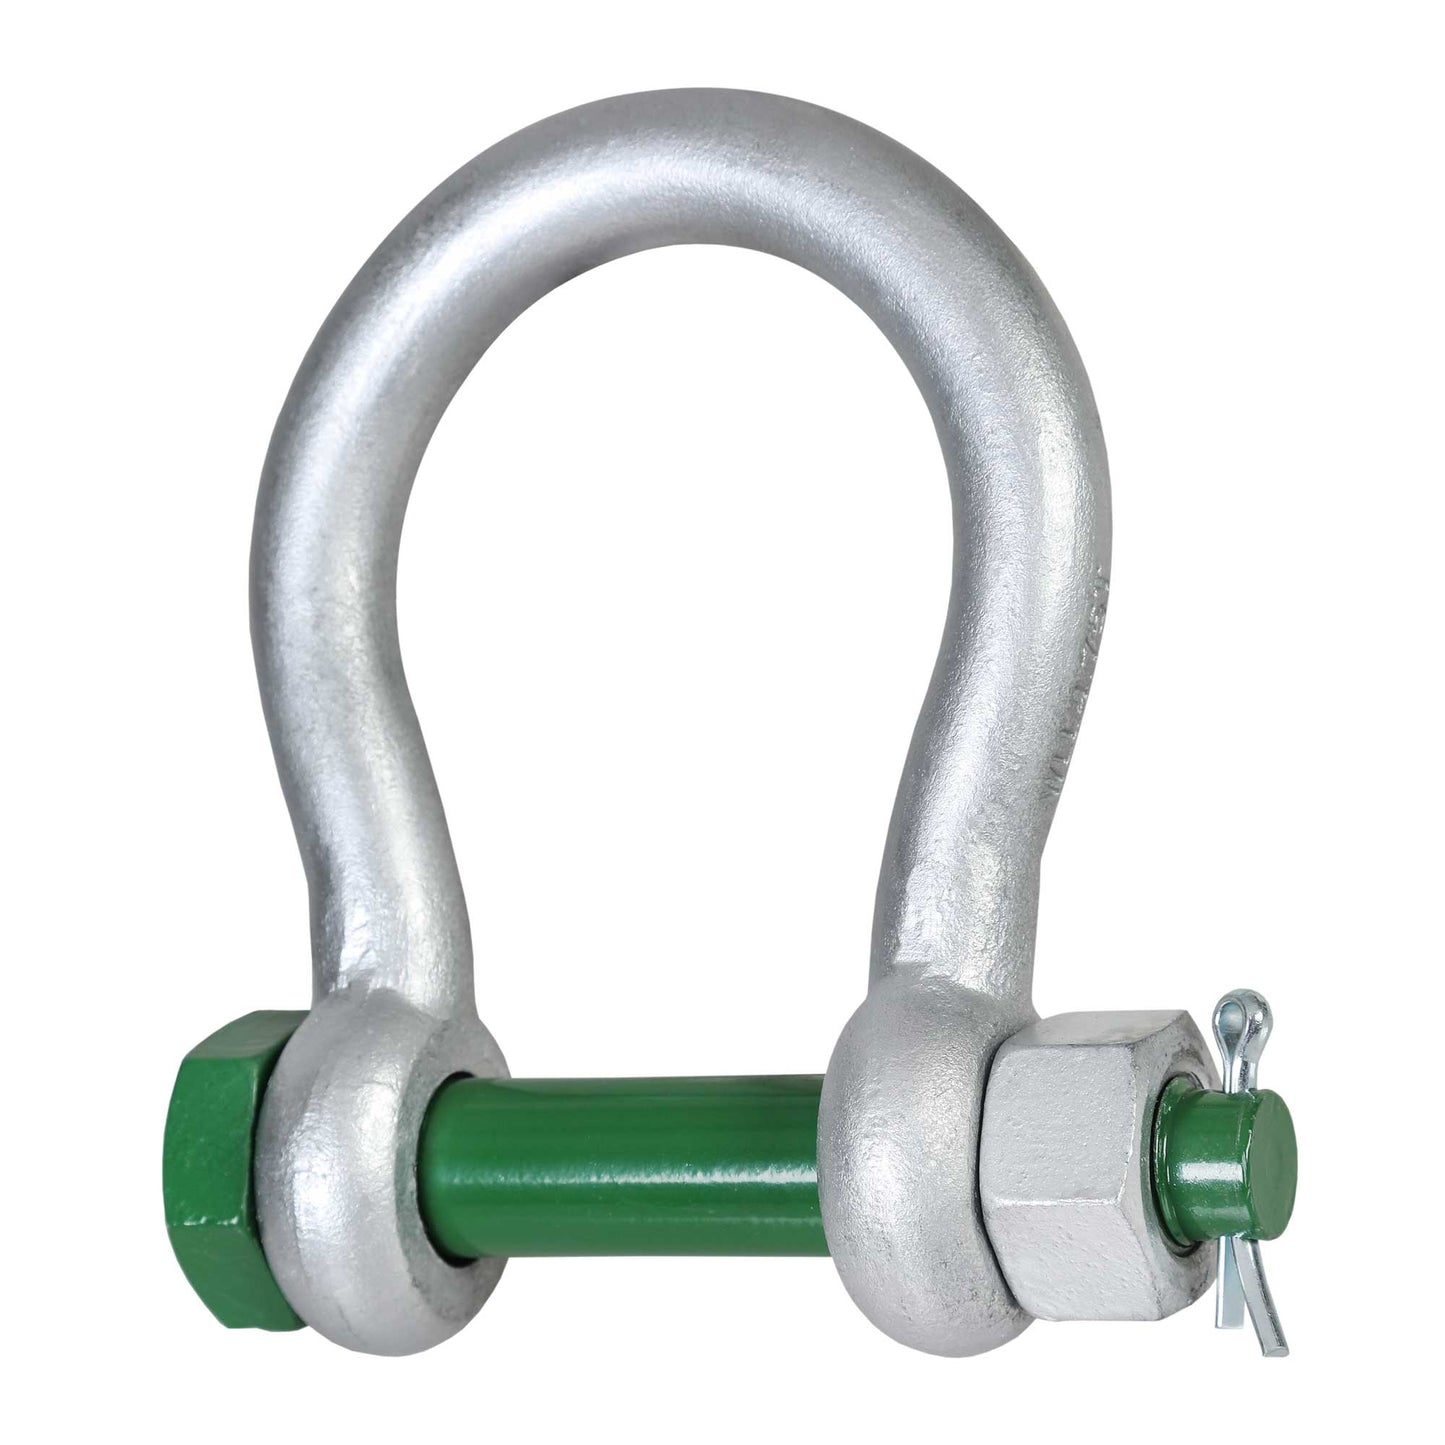 1-3/4" Van Beest Green Pin® Bolt Type Wide Mouth Towing Shackle | G-4263 - 25 Ton primary image